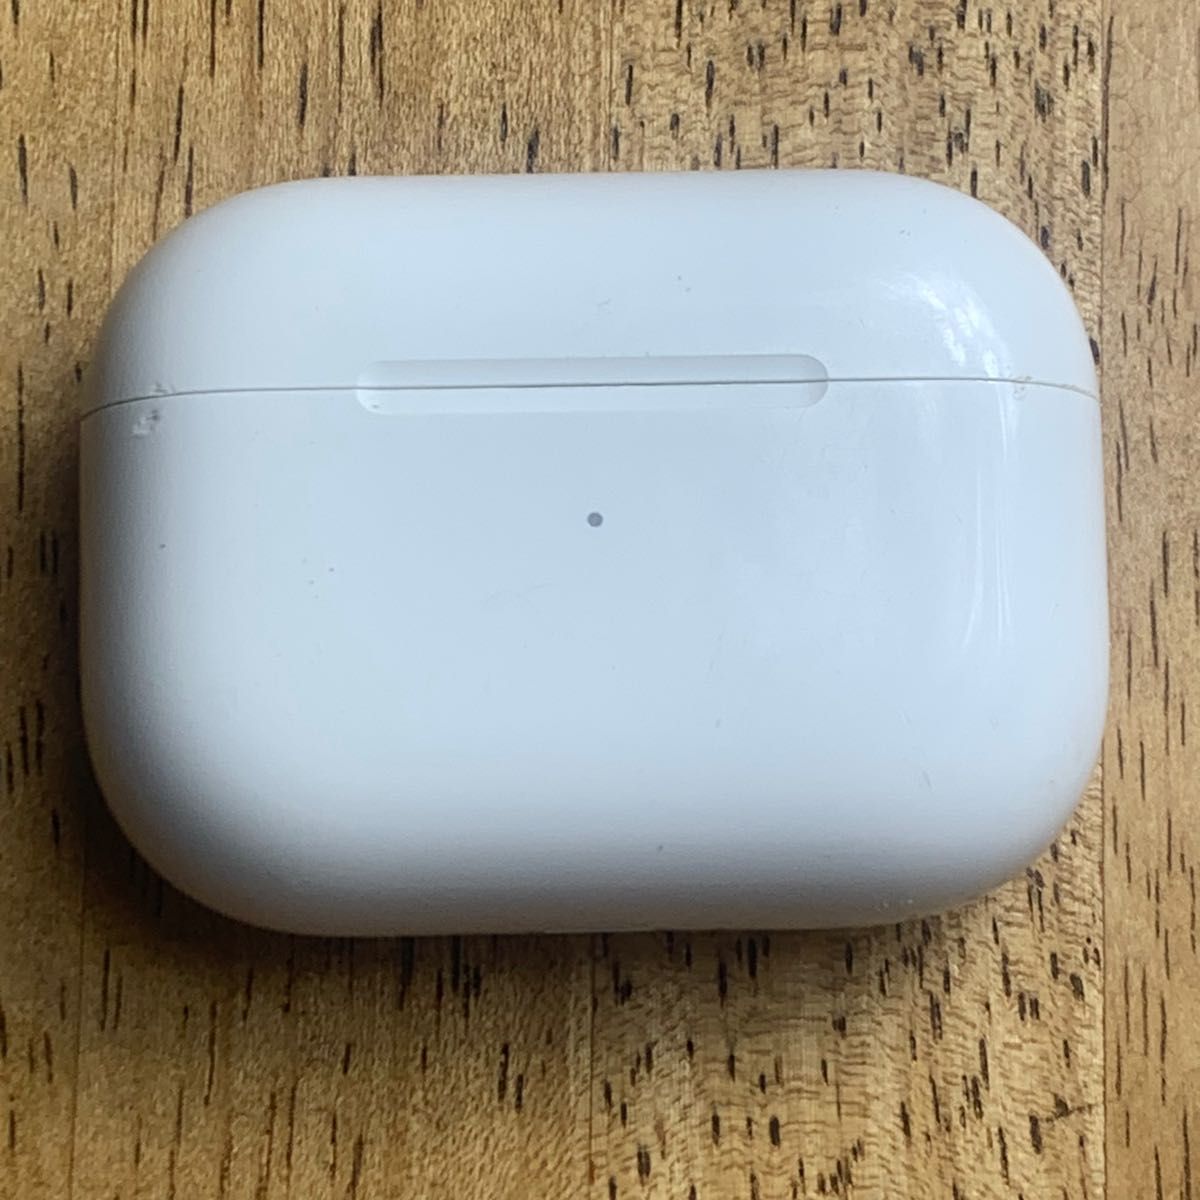 AirPods Pro 充電ケース (純正)｜PayPayフリマ